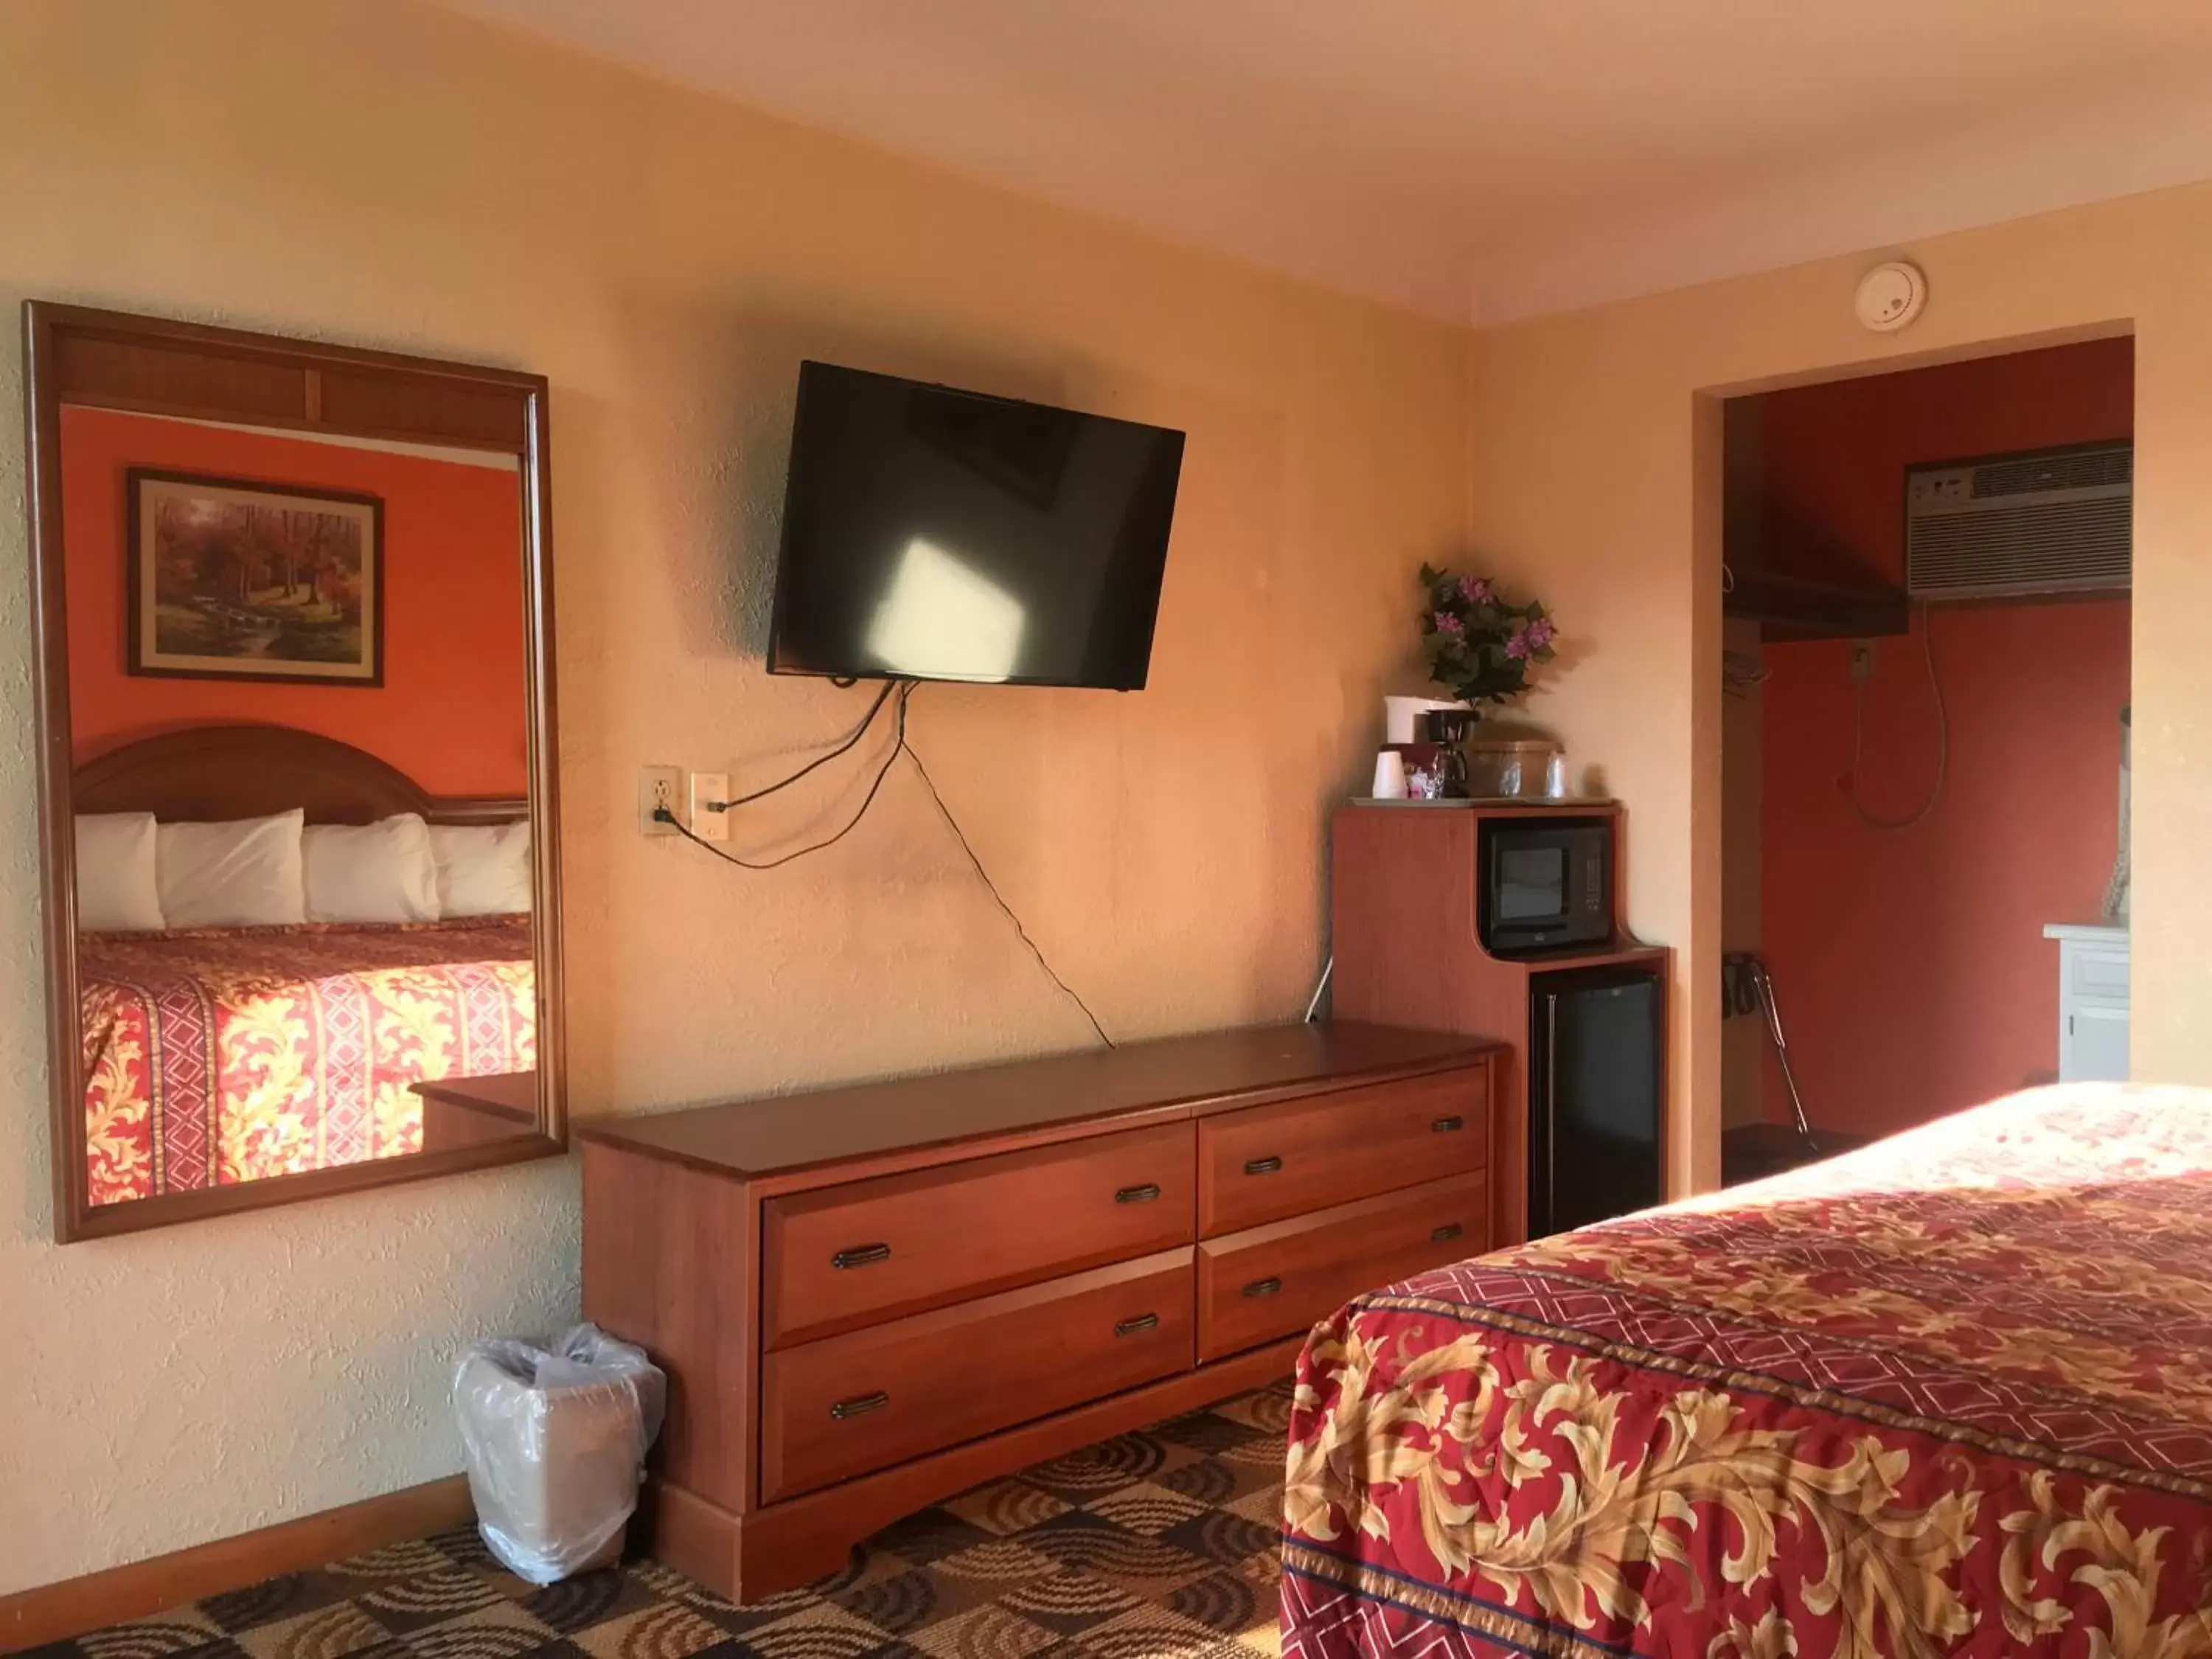 TV and multimedia, Bed in Best Nights Inn - Sparta